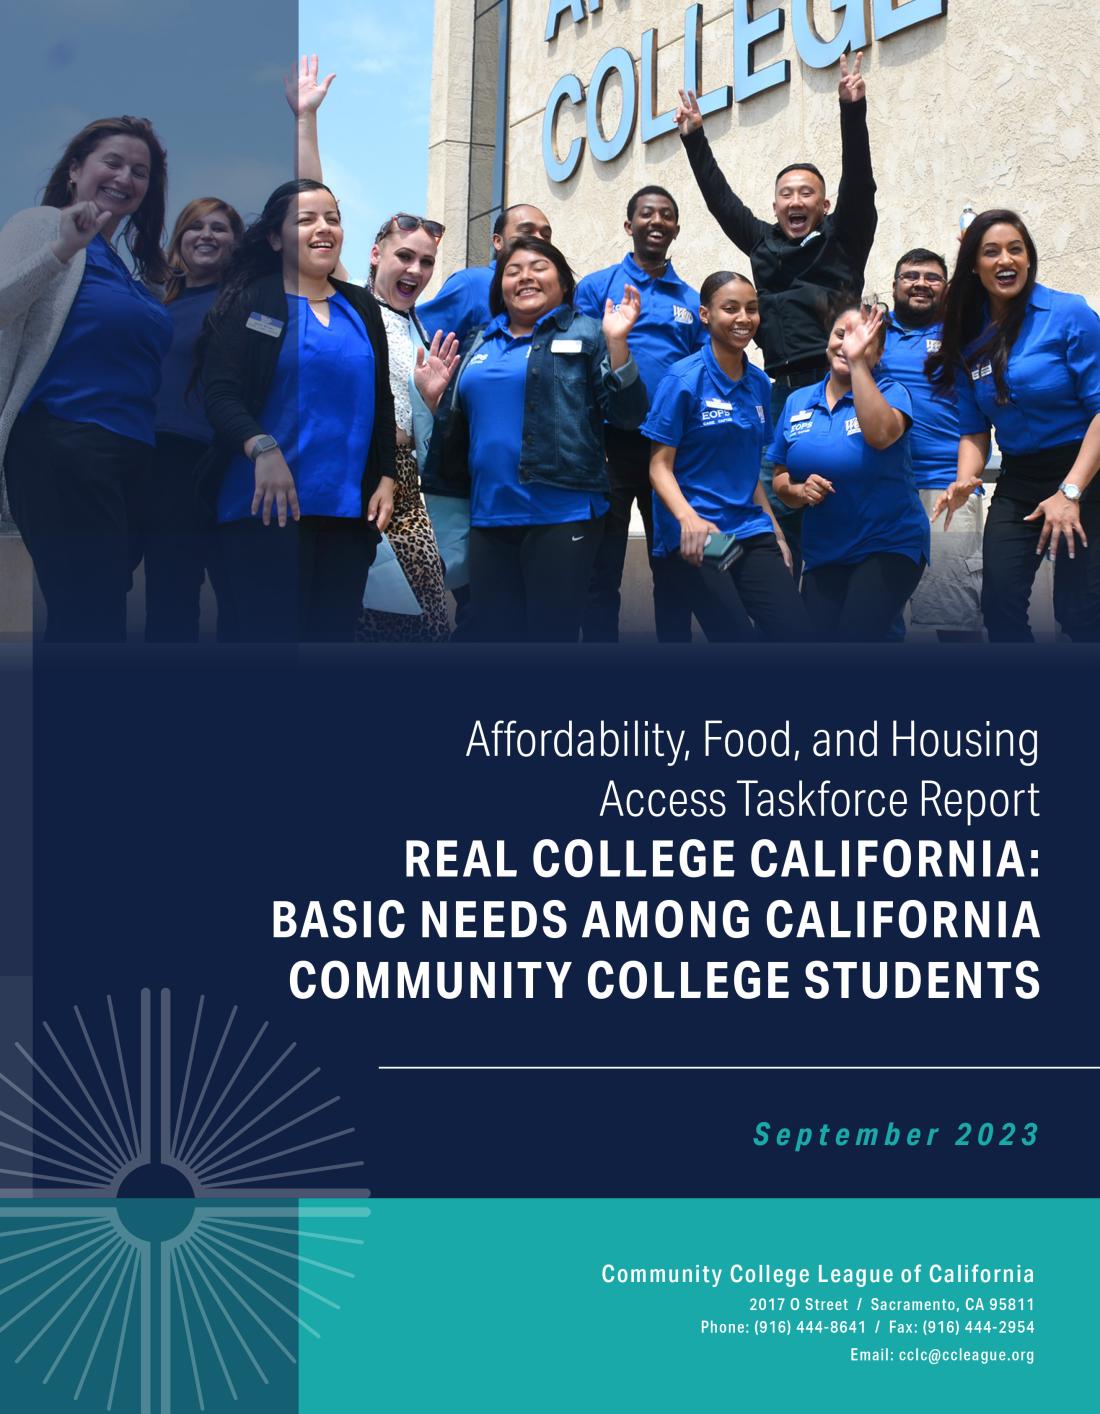 A WLAC photo of the EOPS team was selected to grace the cover of the Community College League of California’s September 2023 report